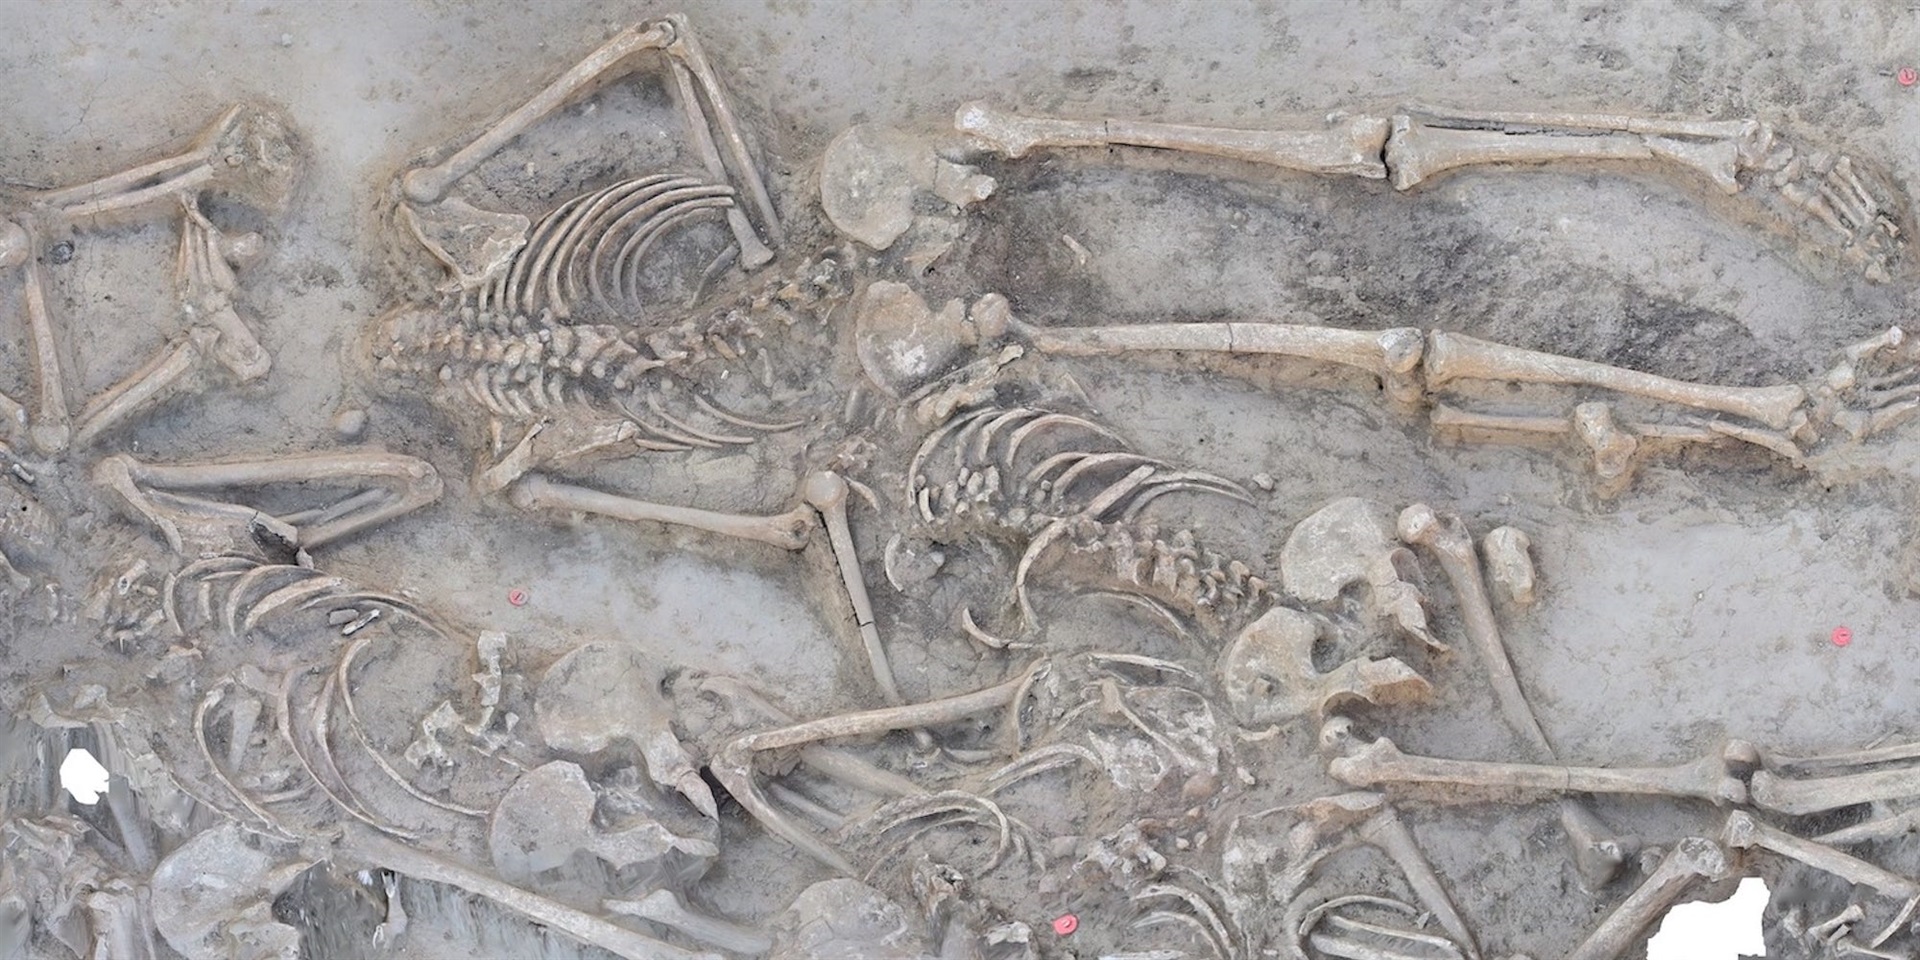 Businessinsider.co.za | Archaeologists found 38 skeletons in a 7,000-year-old mass grave. All but one had been decapitated.